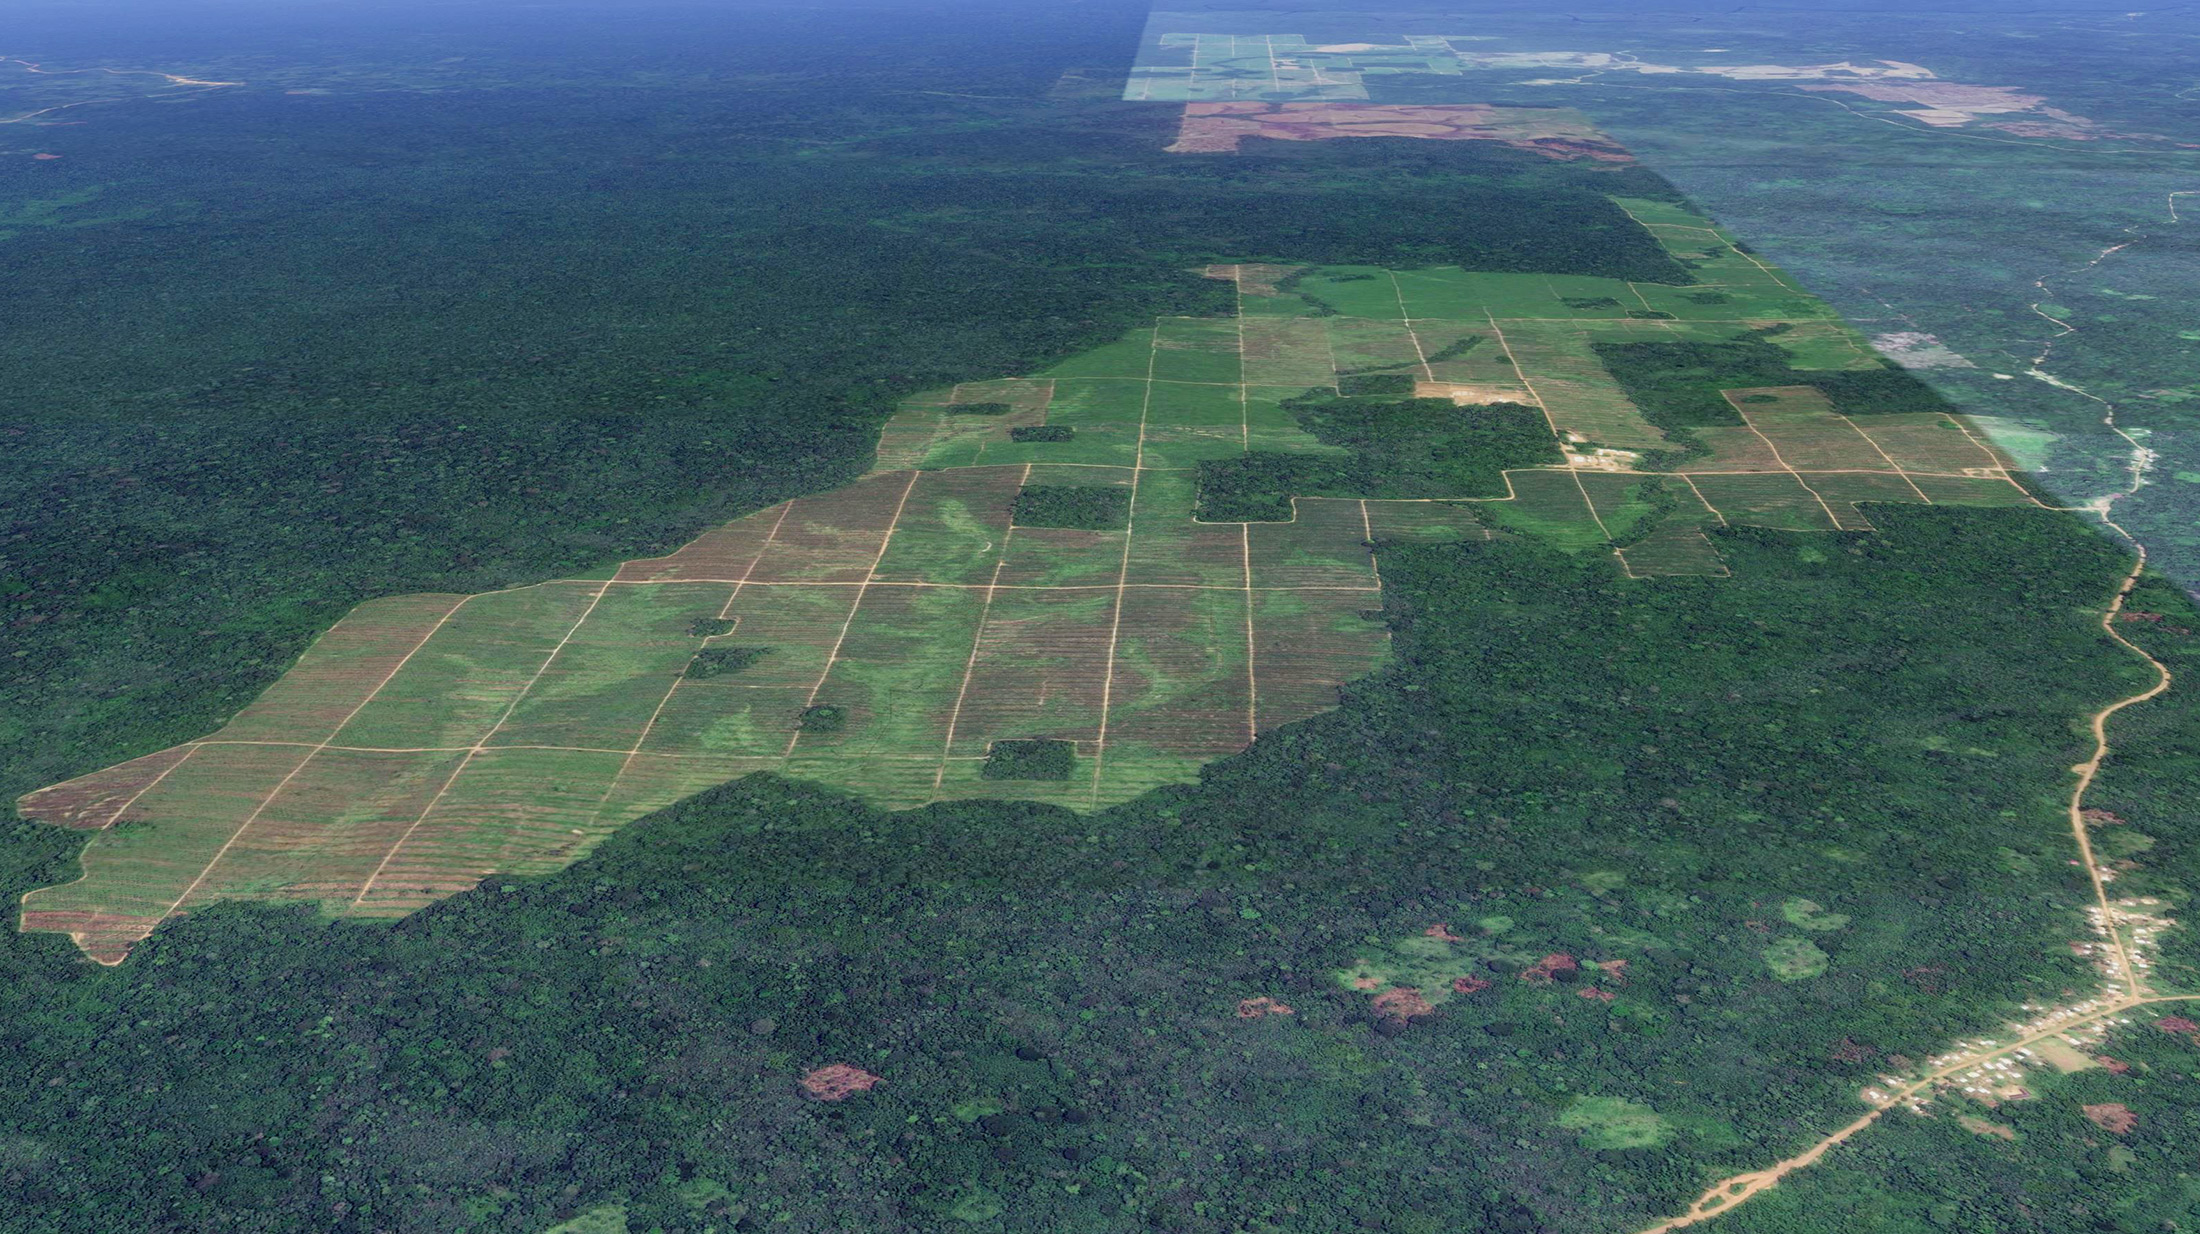 Satellite imagery&nbsp;shows the deforestation close to Wiah’s Town, Liberia.